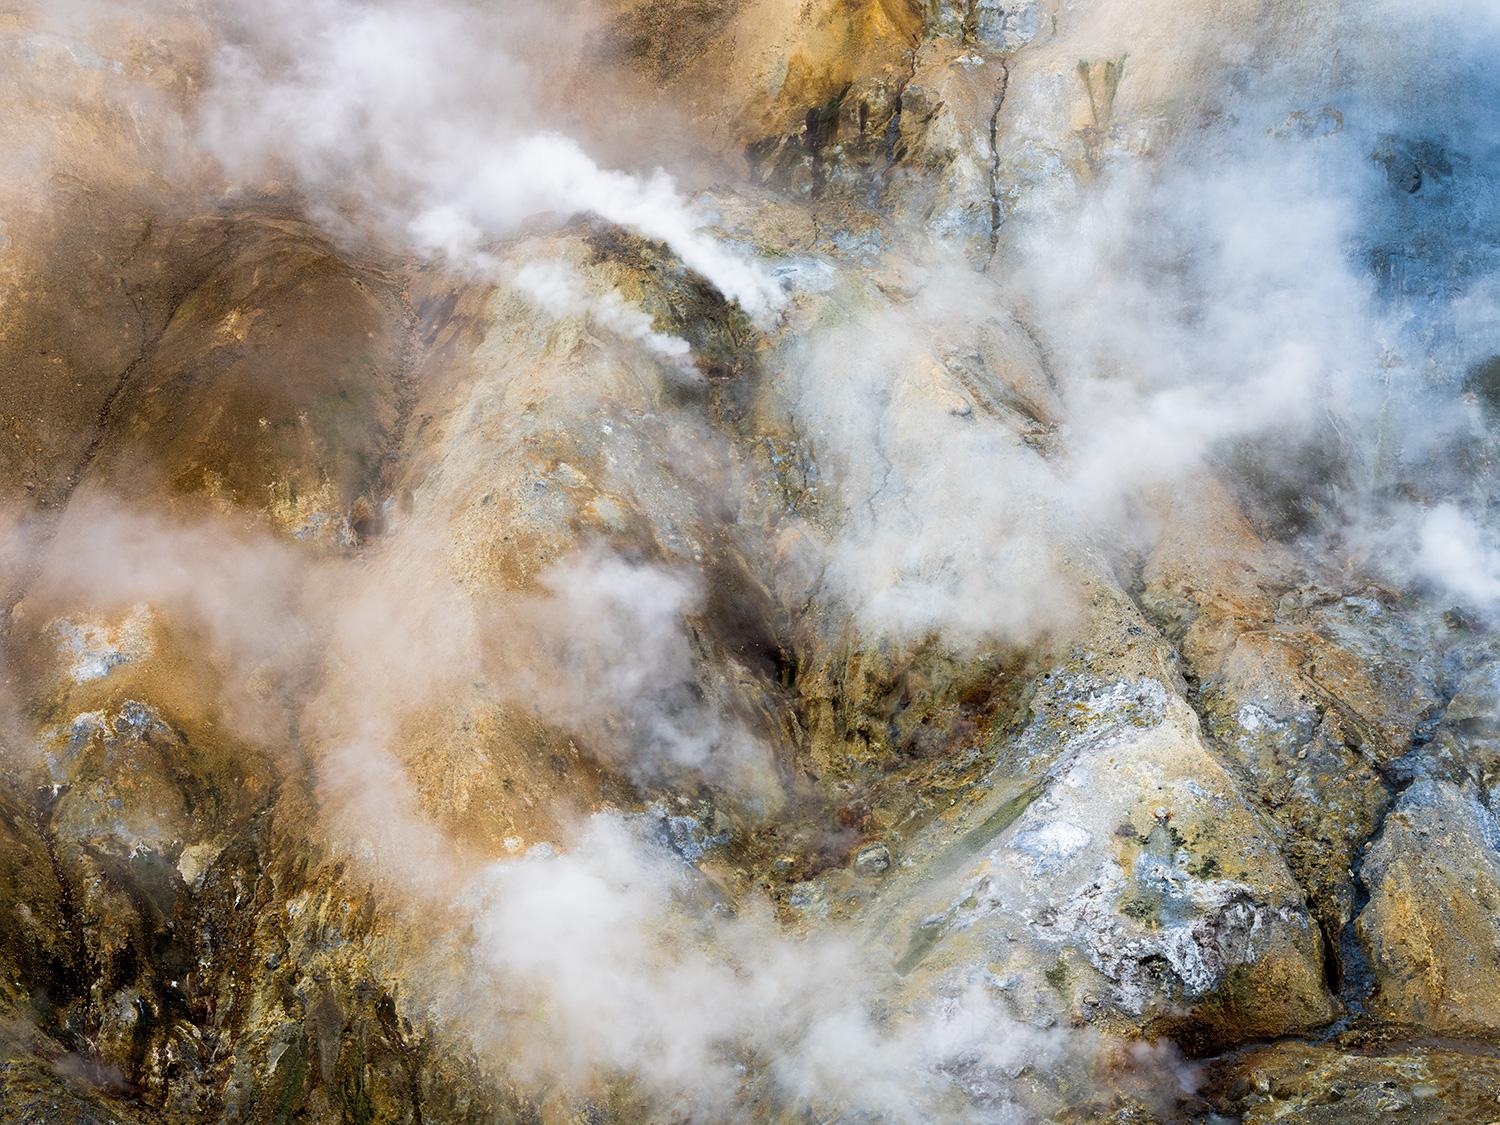 Hissing spitting vents and steaming fumaroles dot this icy-hot hillside in an abstract tableau of intriguing dynamism. 

Series: Ísland
Archival Pigment Platine Print	
All available sizes and editions: 
23" x 30” Edition Size: 10, Artist Proofs